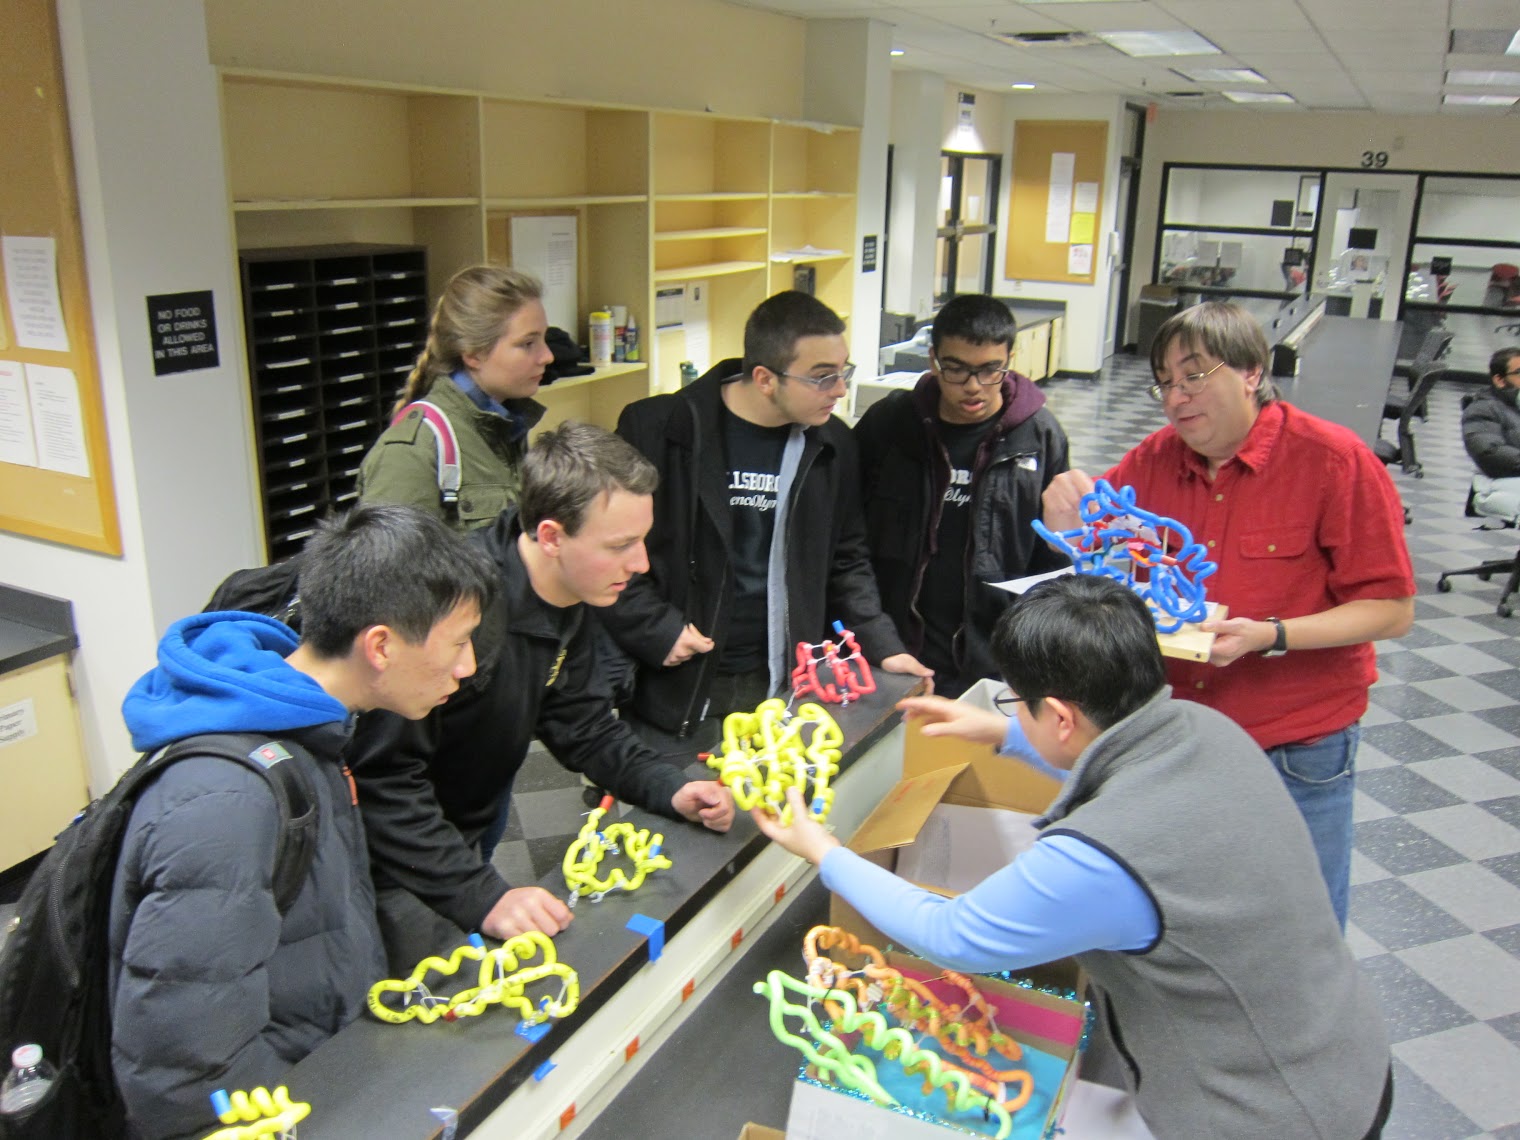 Teams are scored on protein models built in advance, smaller models built during the competition, and a written exam